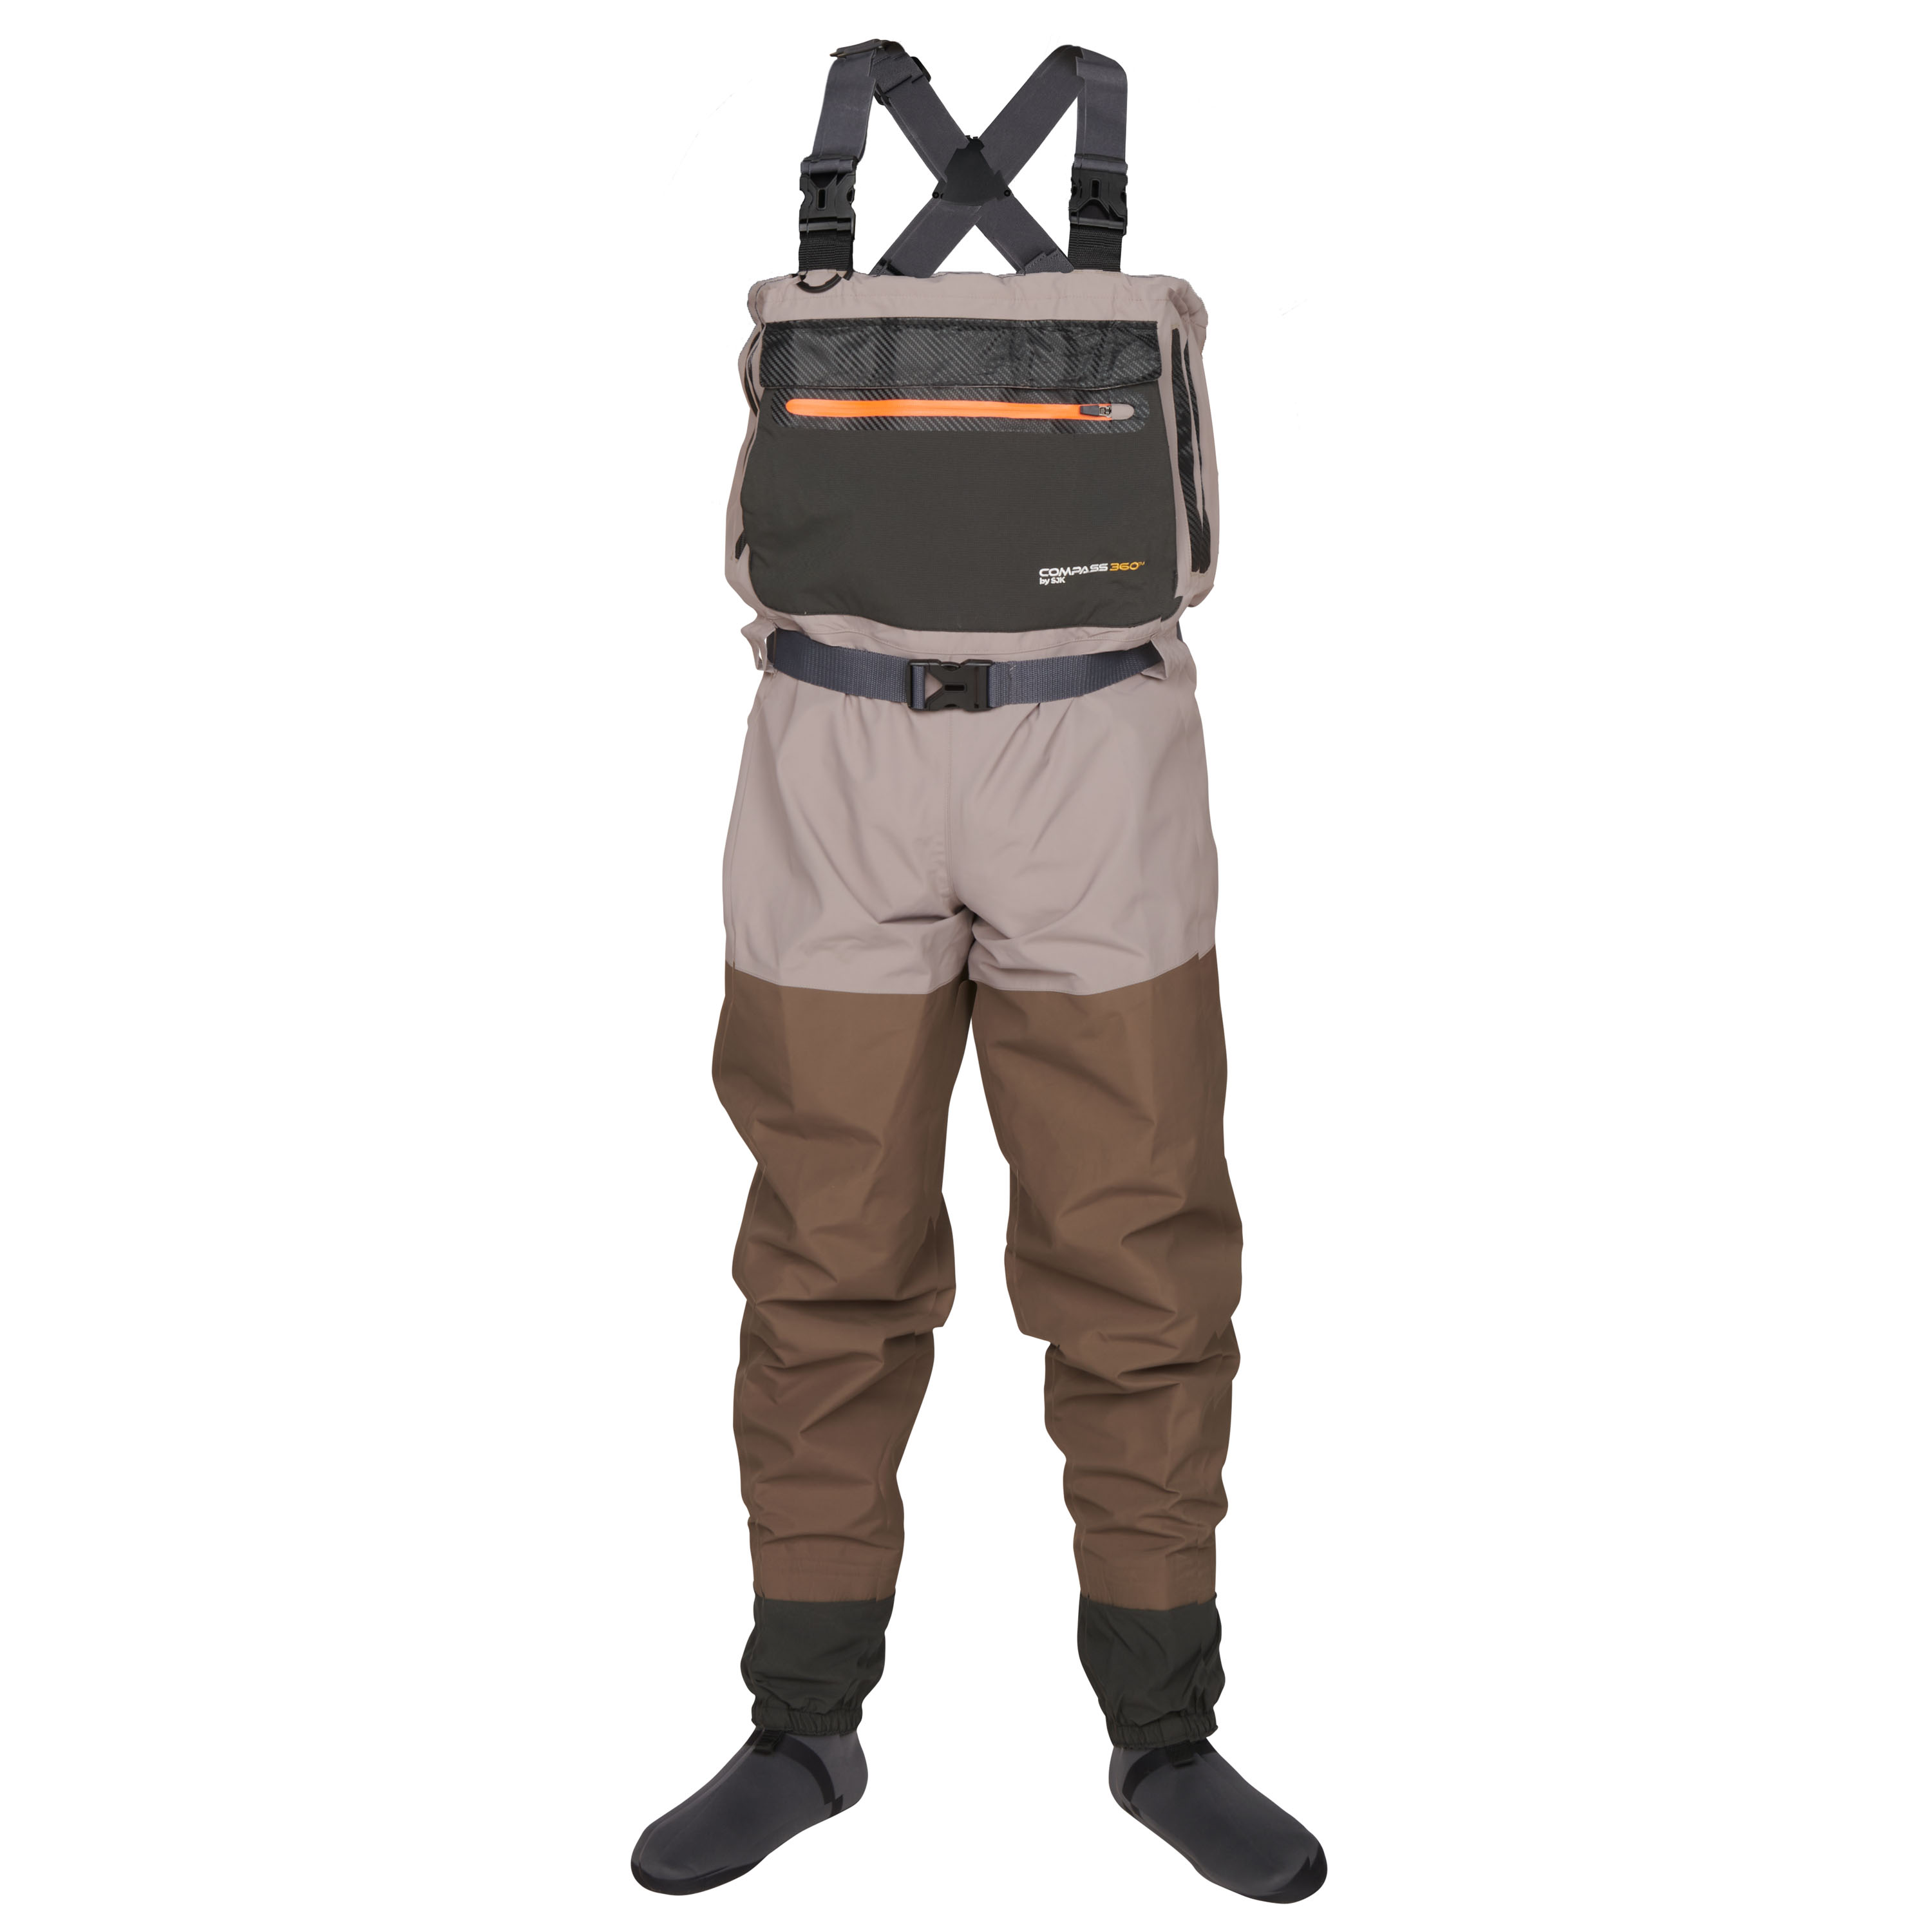 Thigh waders model WRM02 FLUO yellow orange